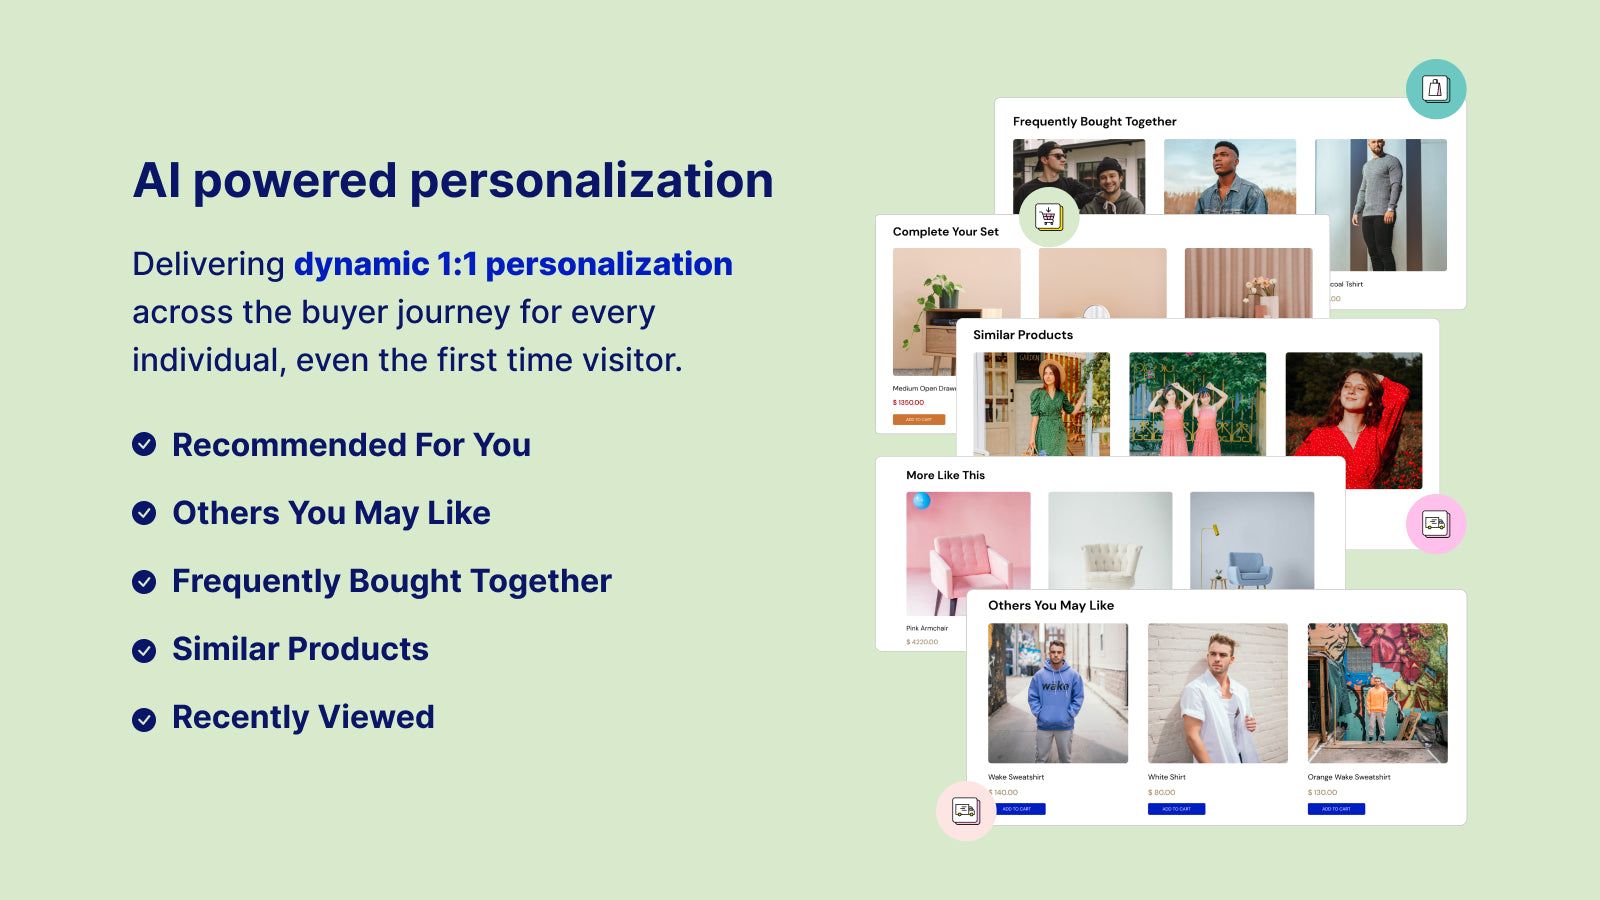 Delivering dynamic 1:1 personalization across the buyer journey 